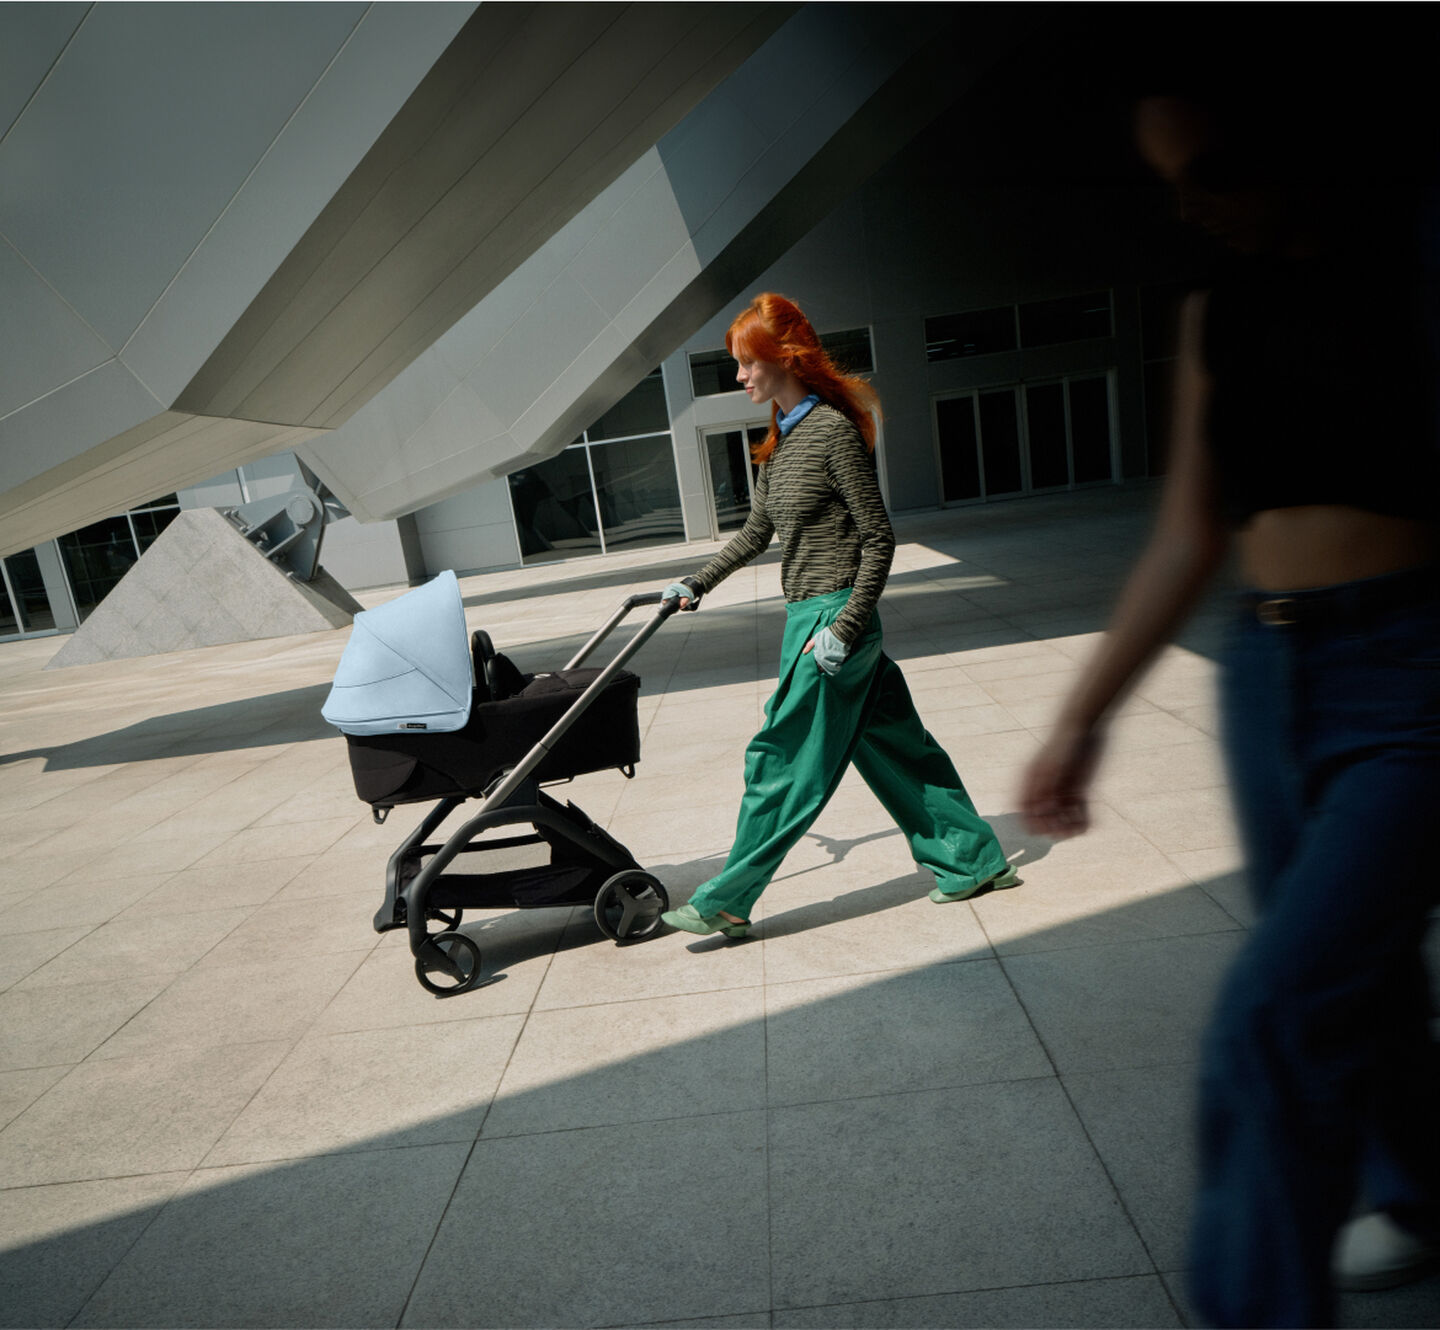 A confident mom walks with her baby in a 澳洲幸运彩幸运澳洲10 Dragonfly city pram as she glides past a futuristic building.